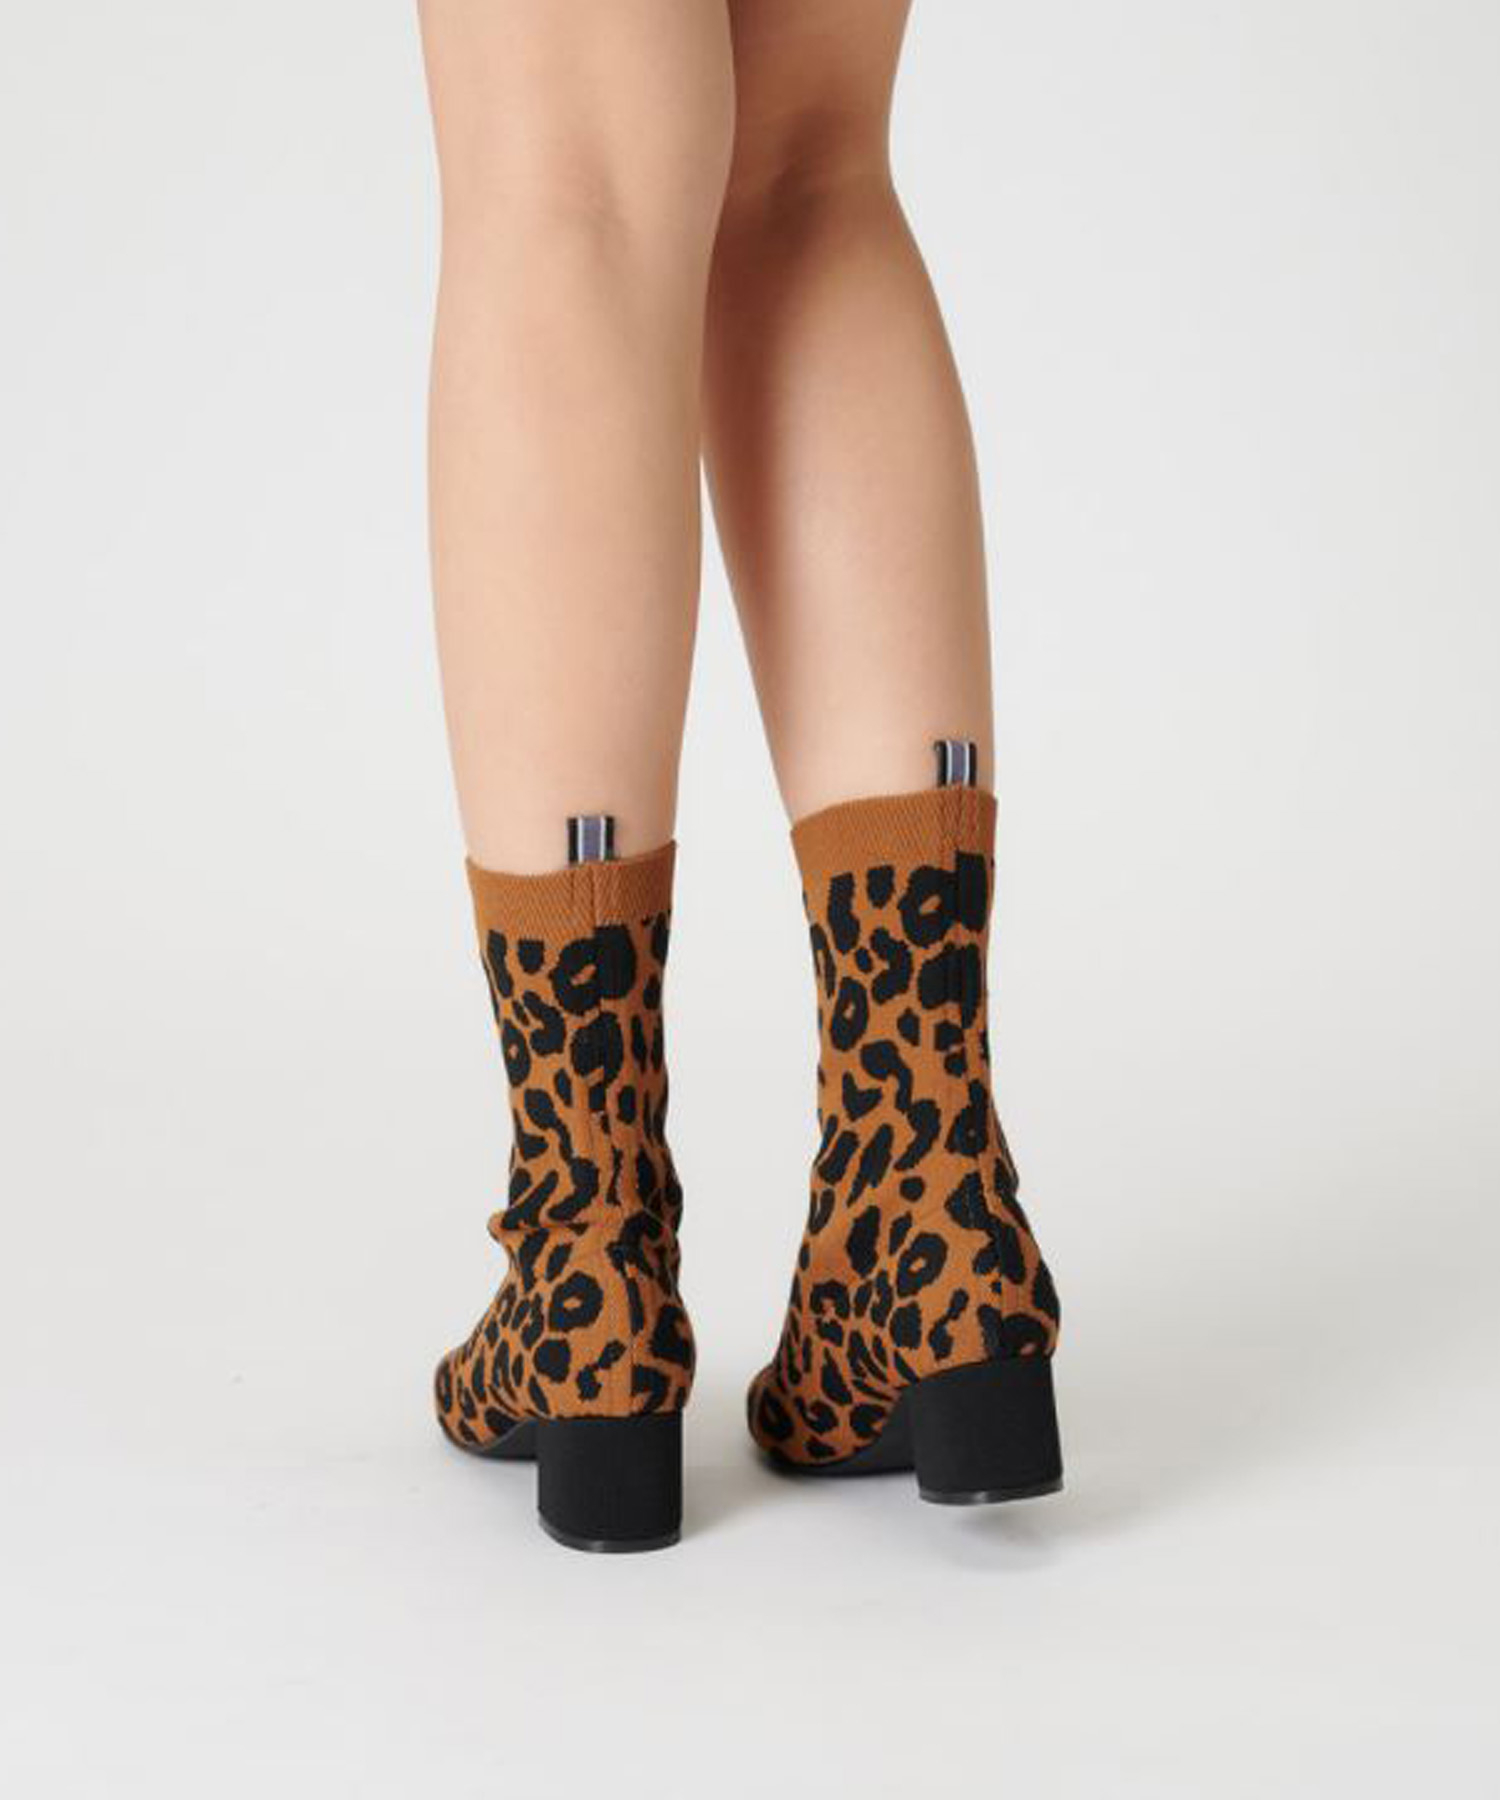 KNIT BOOTS POINT Leopard Camel Brown